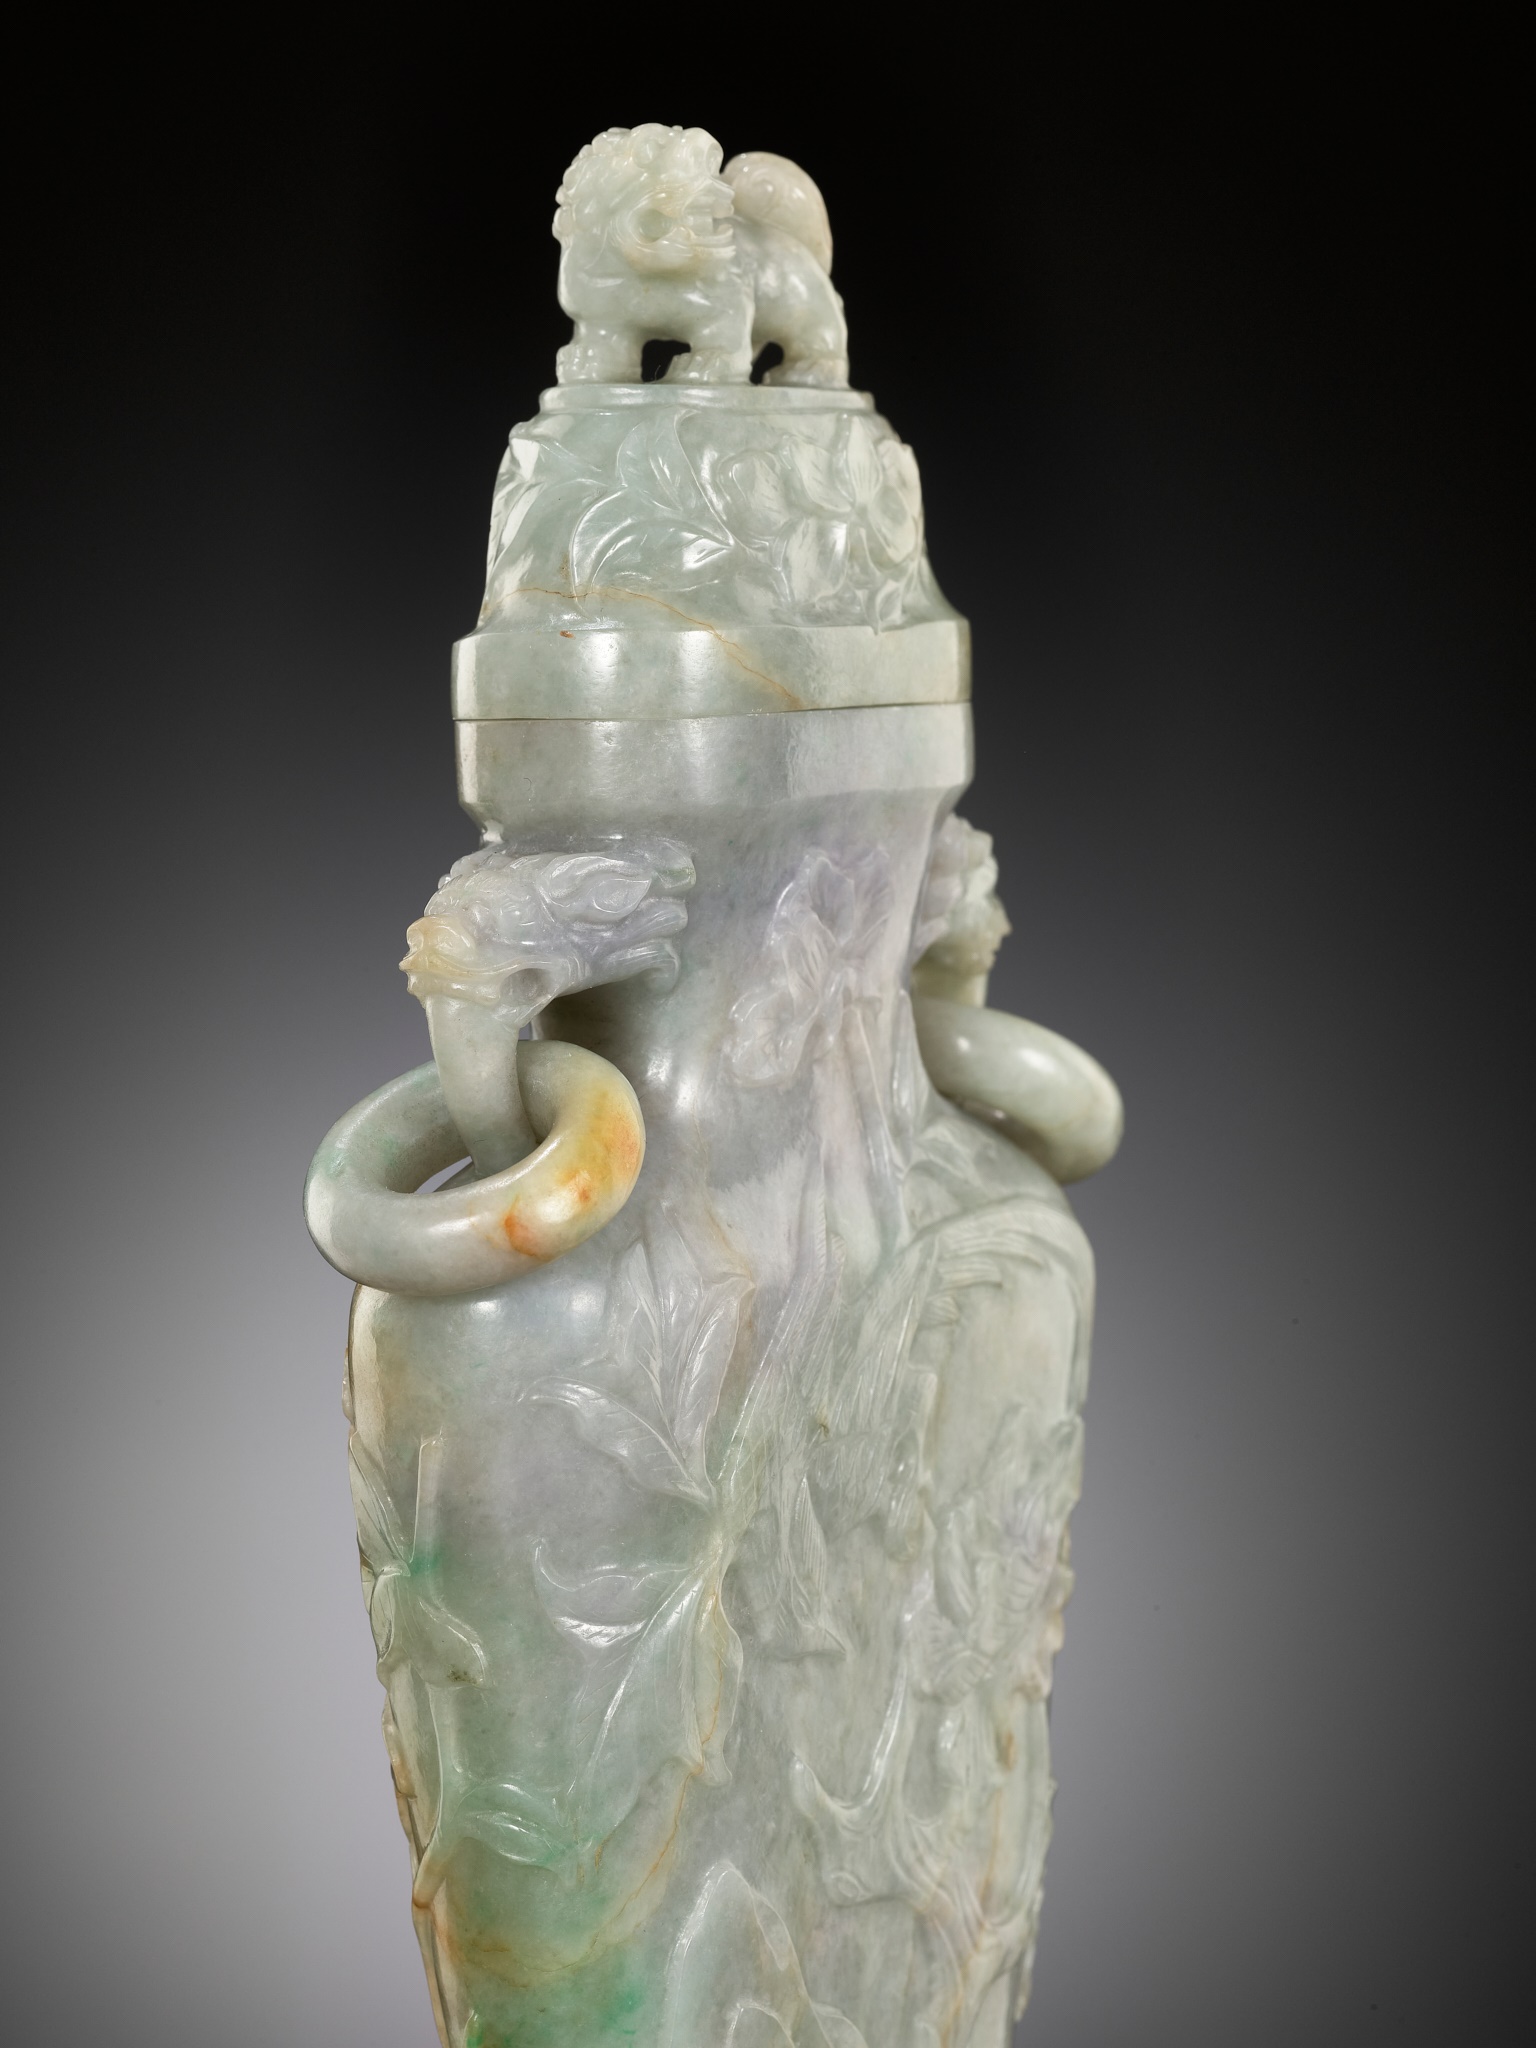 A JADEITE BALUSTER VASE AND COVER, LATE QING DYNASTY TO REPUBLIC PERIOD